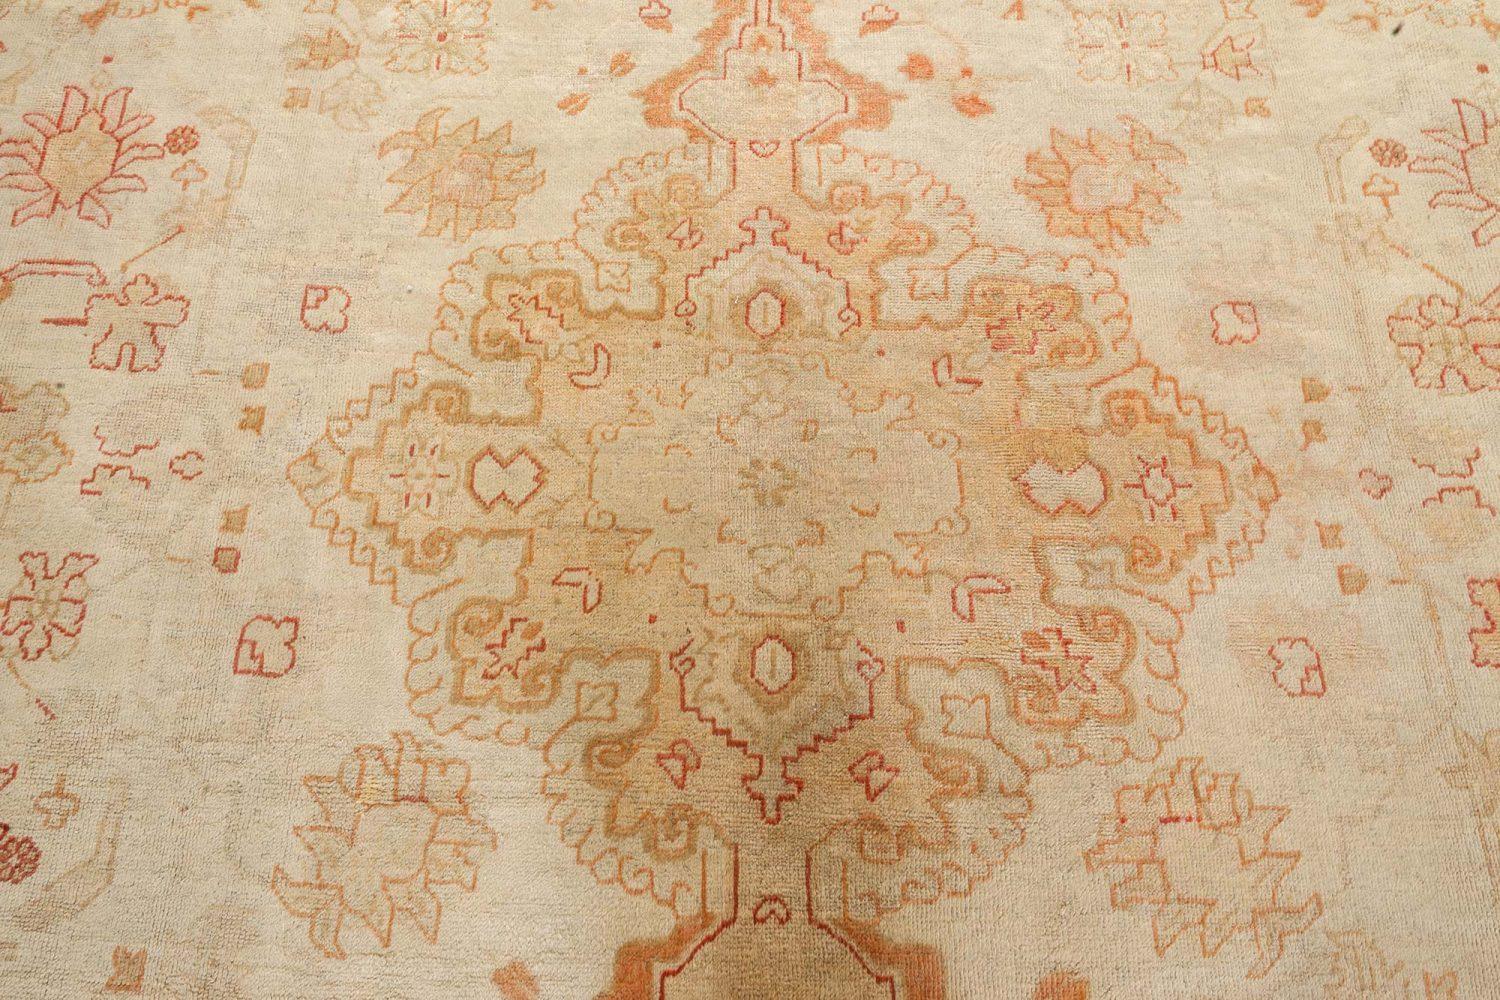 Early 20th Century Turkish Oushak beige, gold, orange hand knotted wool rug
Size: 12'6